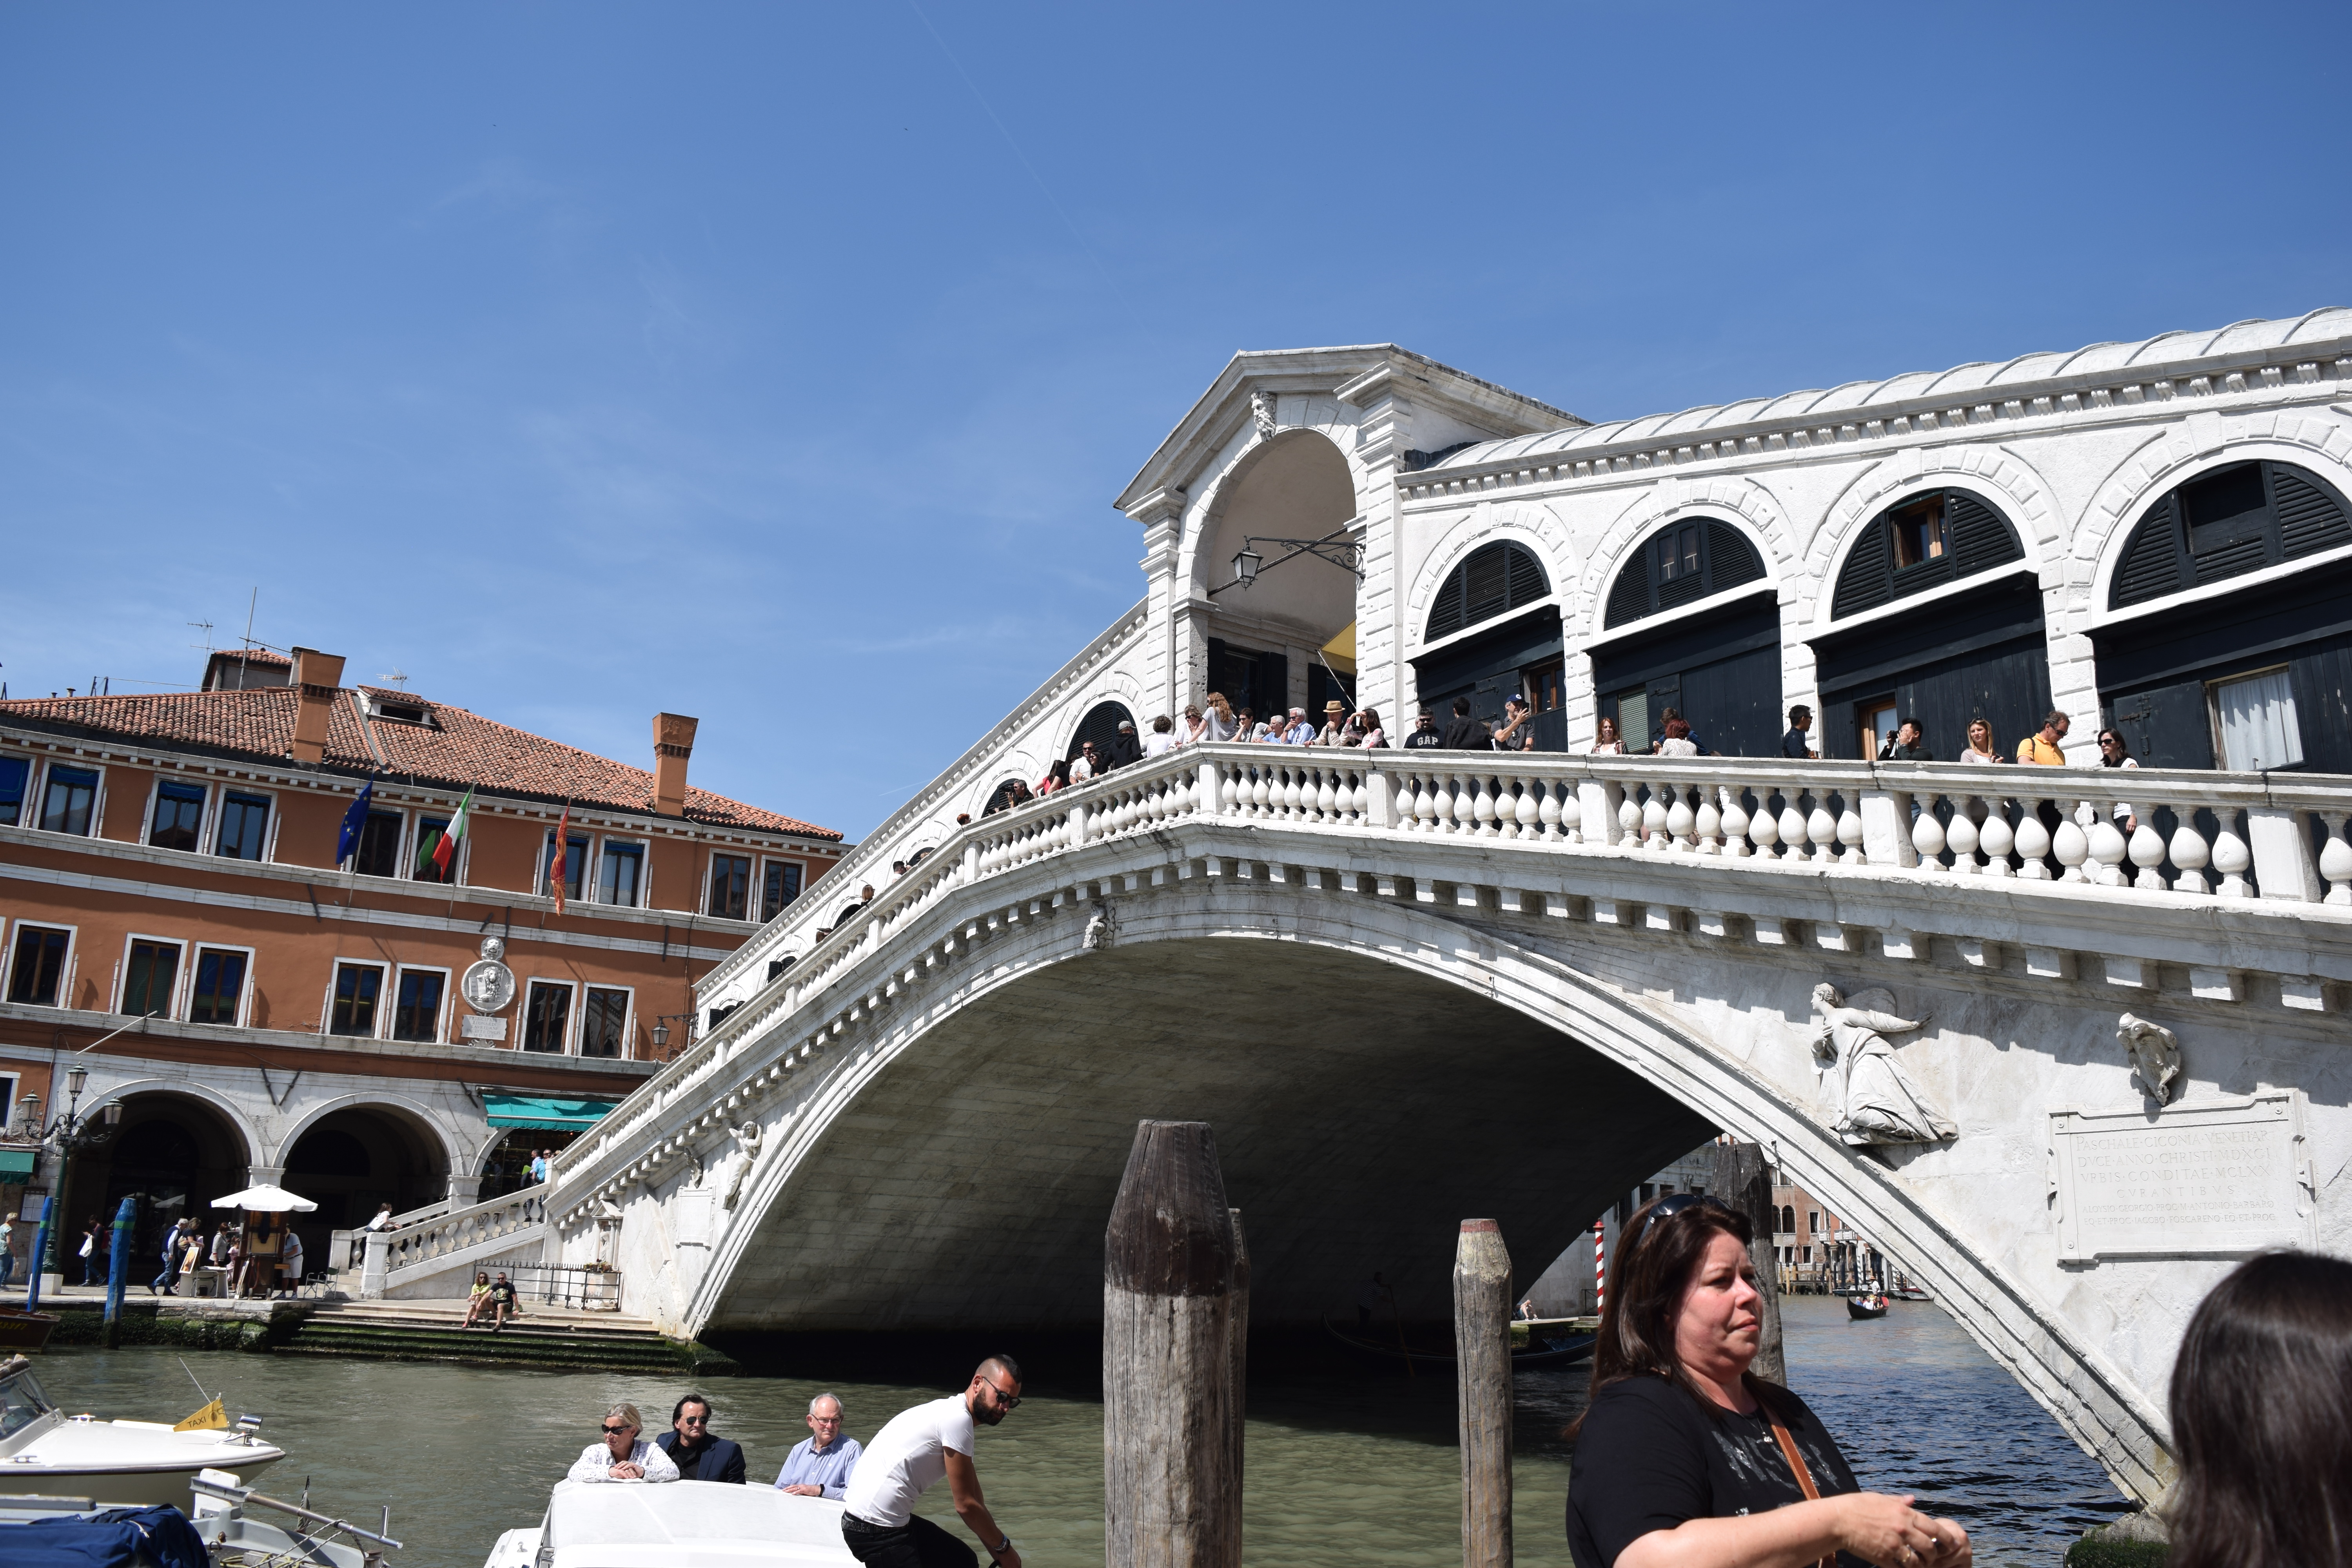 3 Days In Venice - What to do in Venice Italy - Things to do in Venice - Italy Itinerary - Planning a trip to Venice, Italy - Venice Italy Photography - Communikait by Kait Hanson